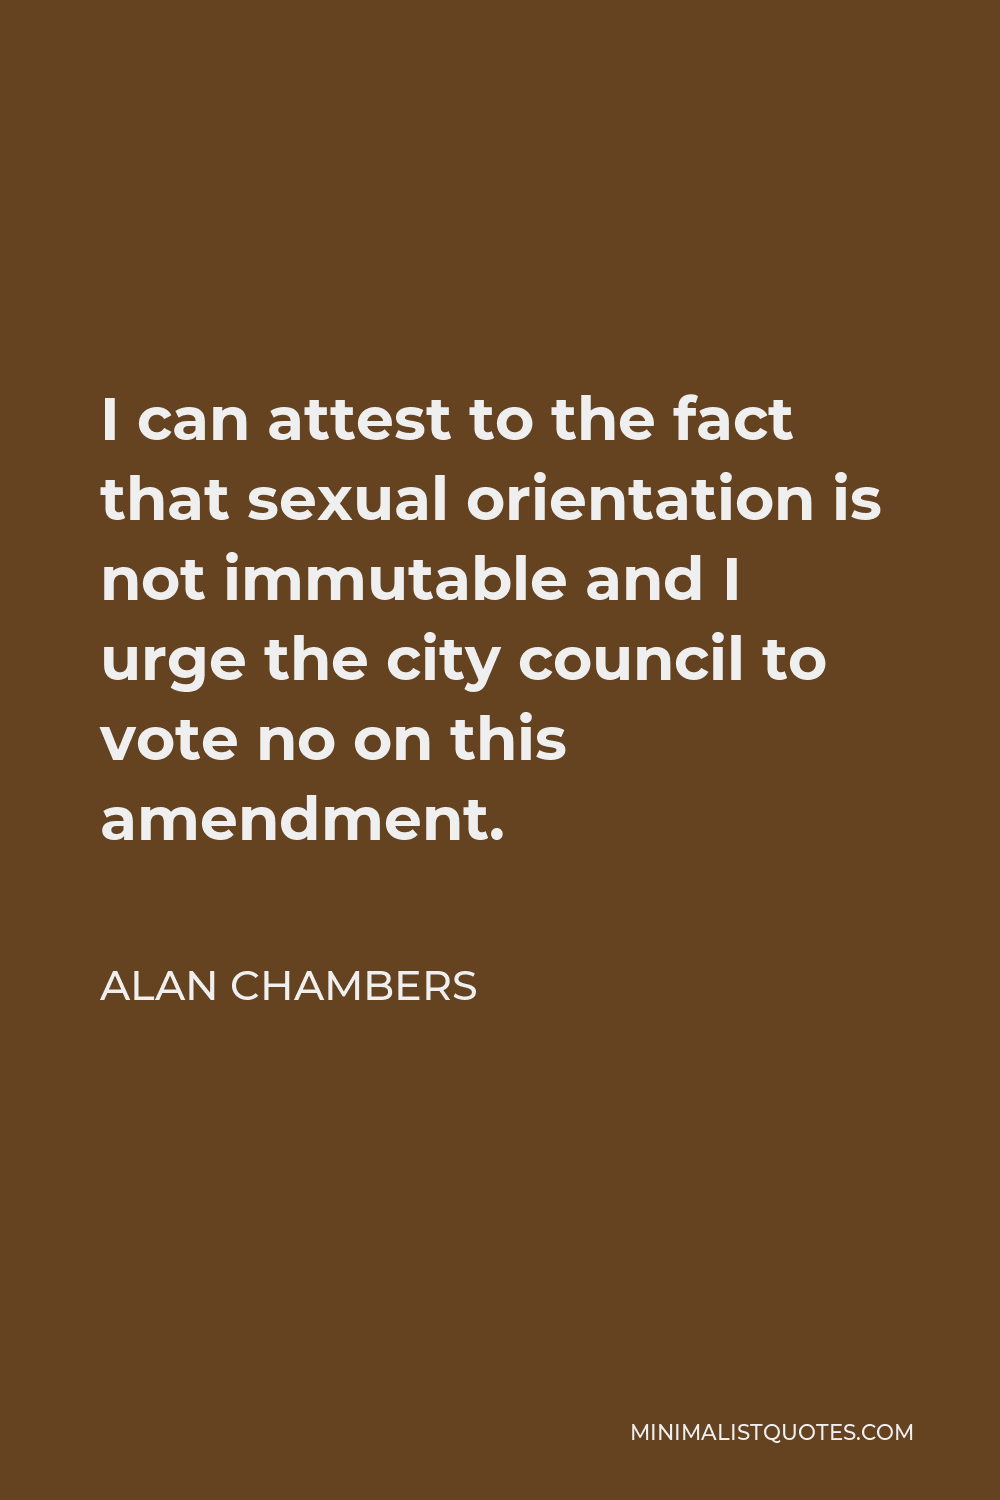 Alan Chambers Quote - I can attest to the fact that sexual orientation is not immutable and I urge the city council to vote no on this amendment.